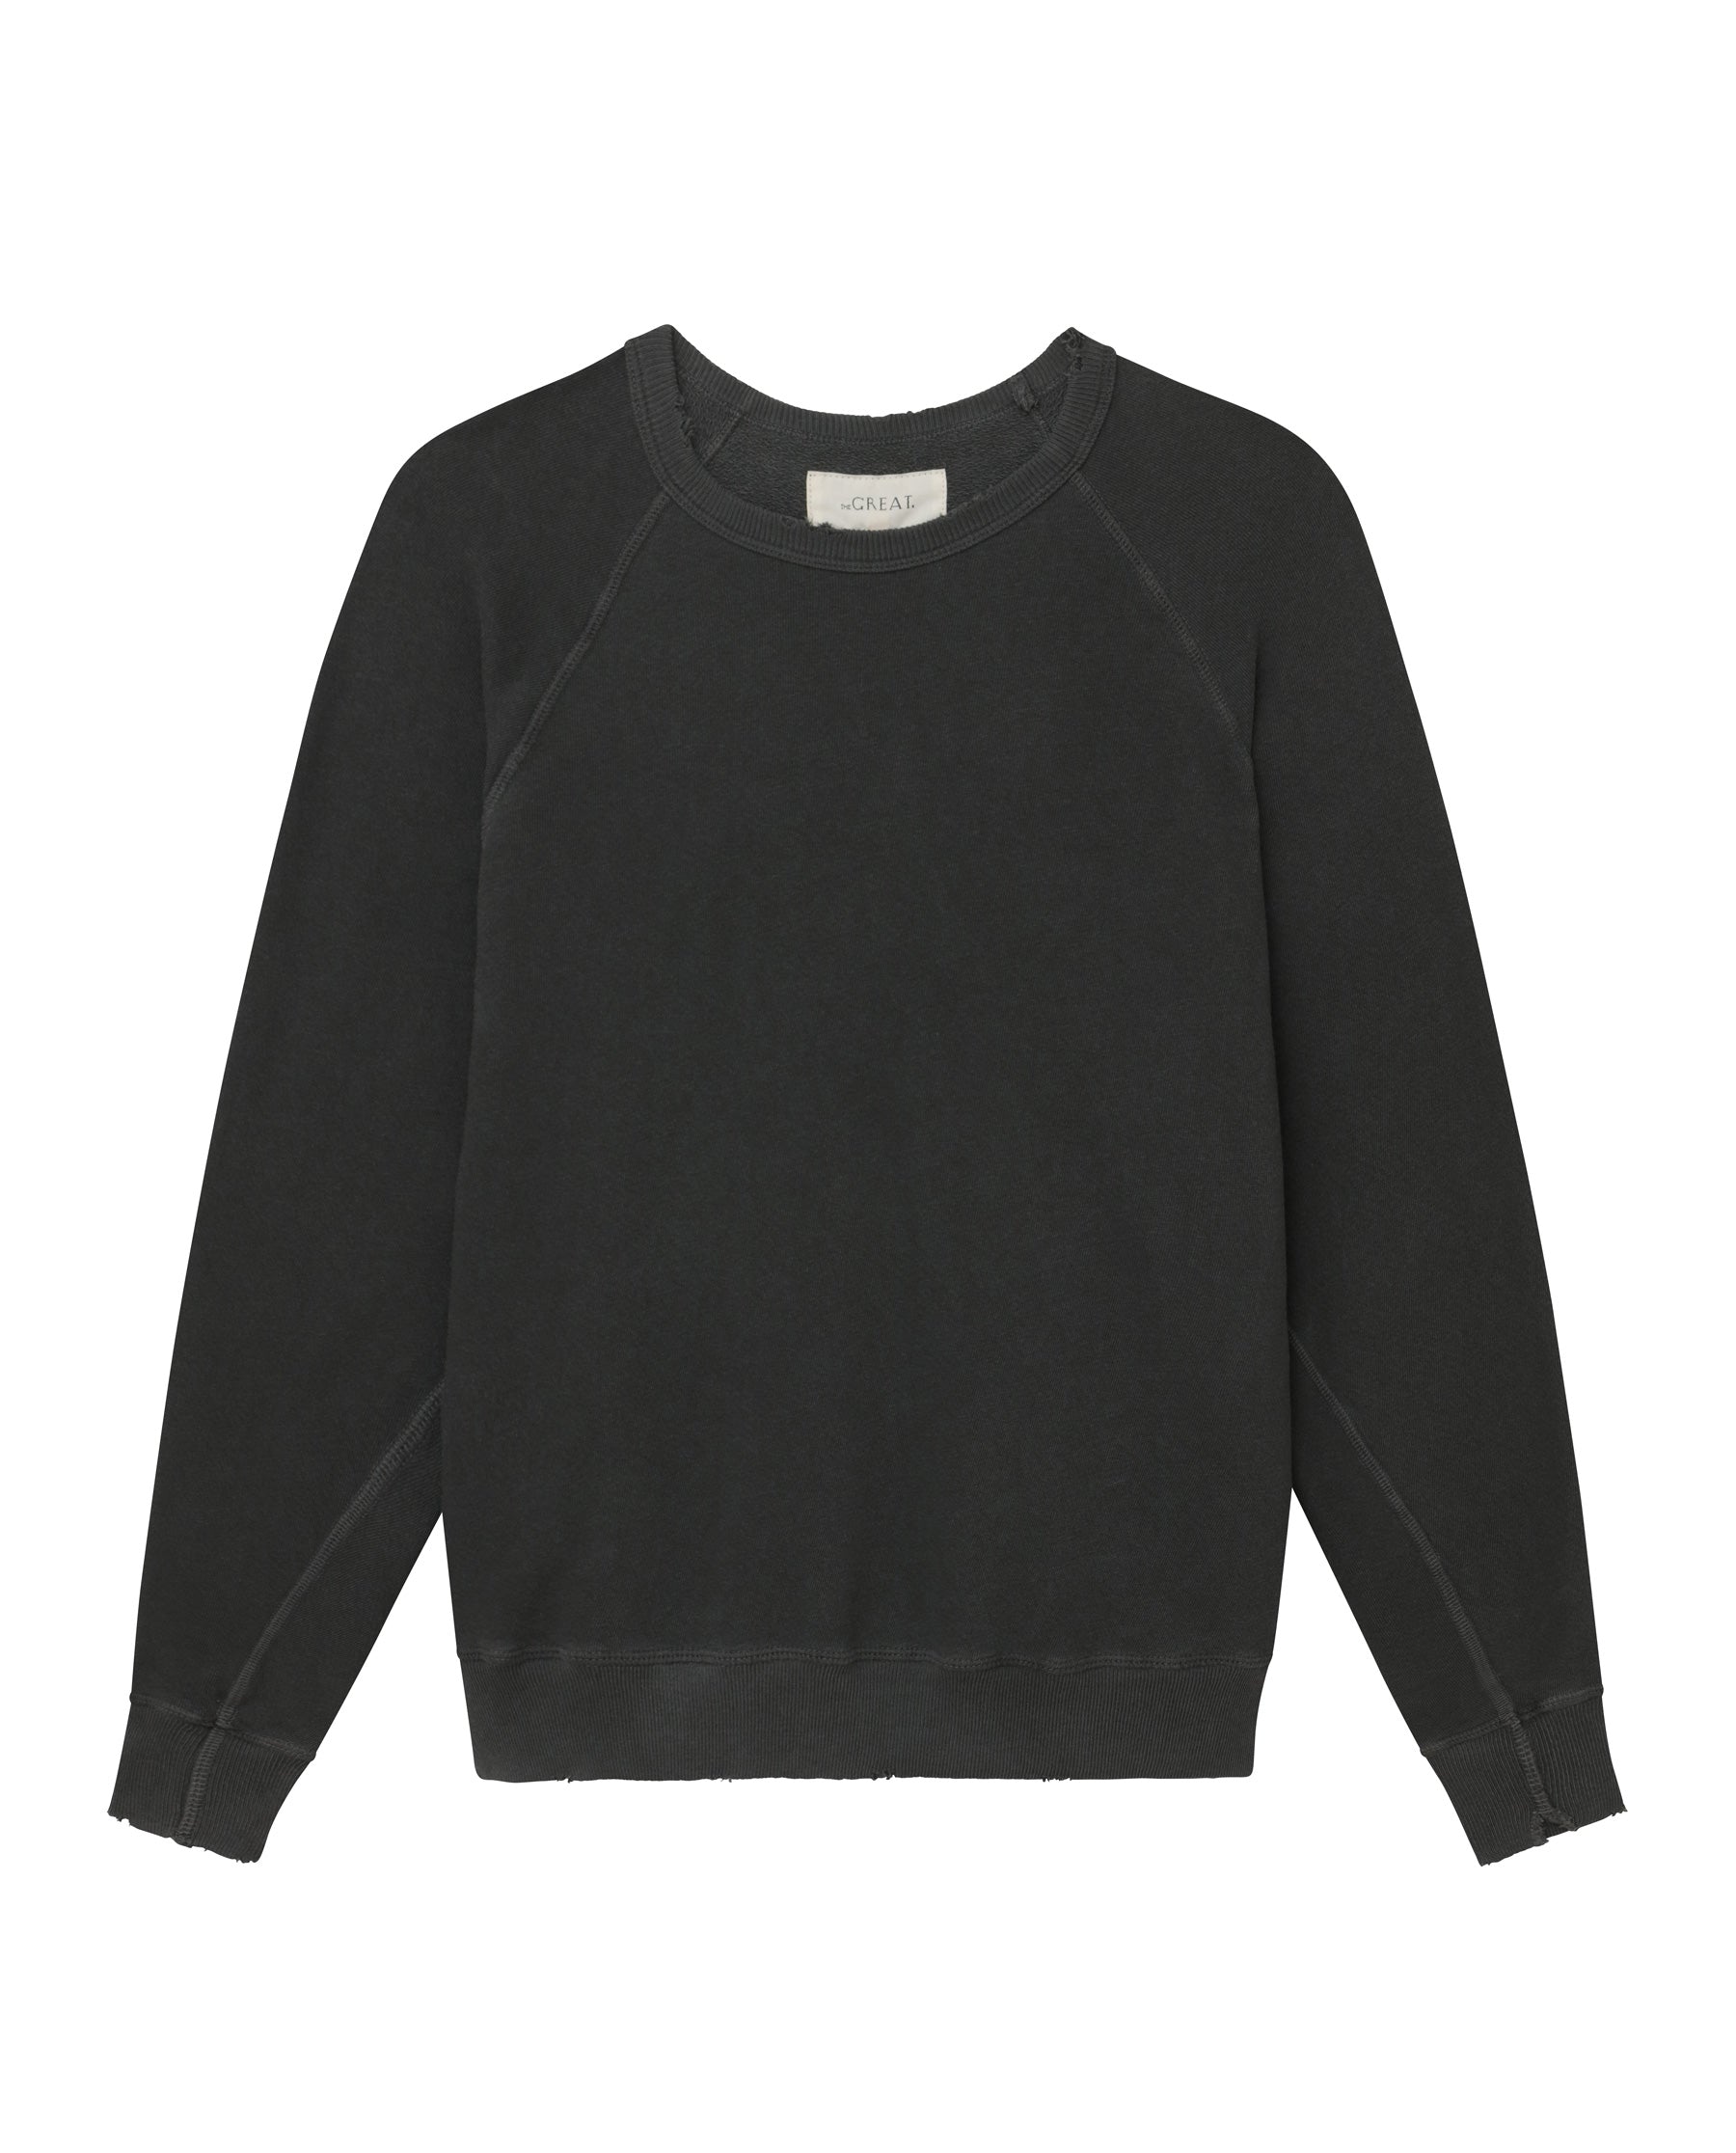 The College Sweatshirt. Solid -- Washed Black